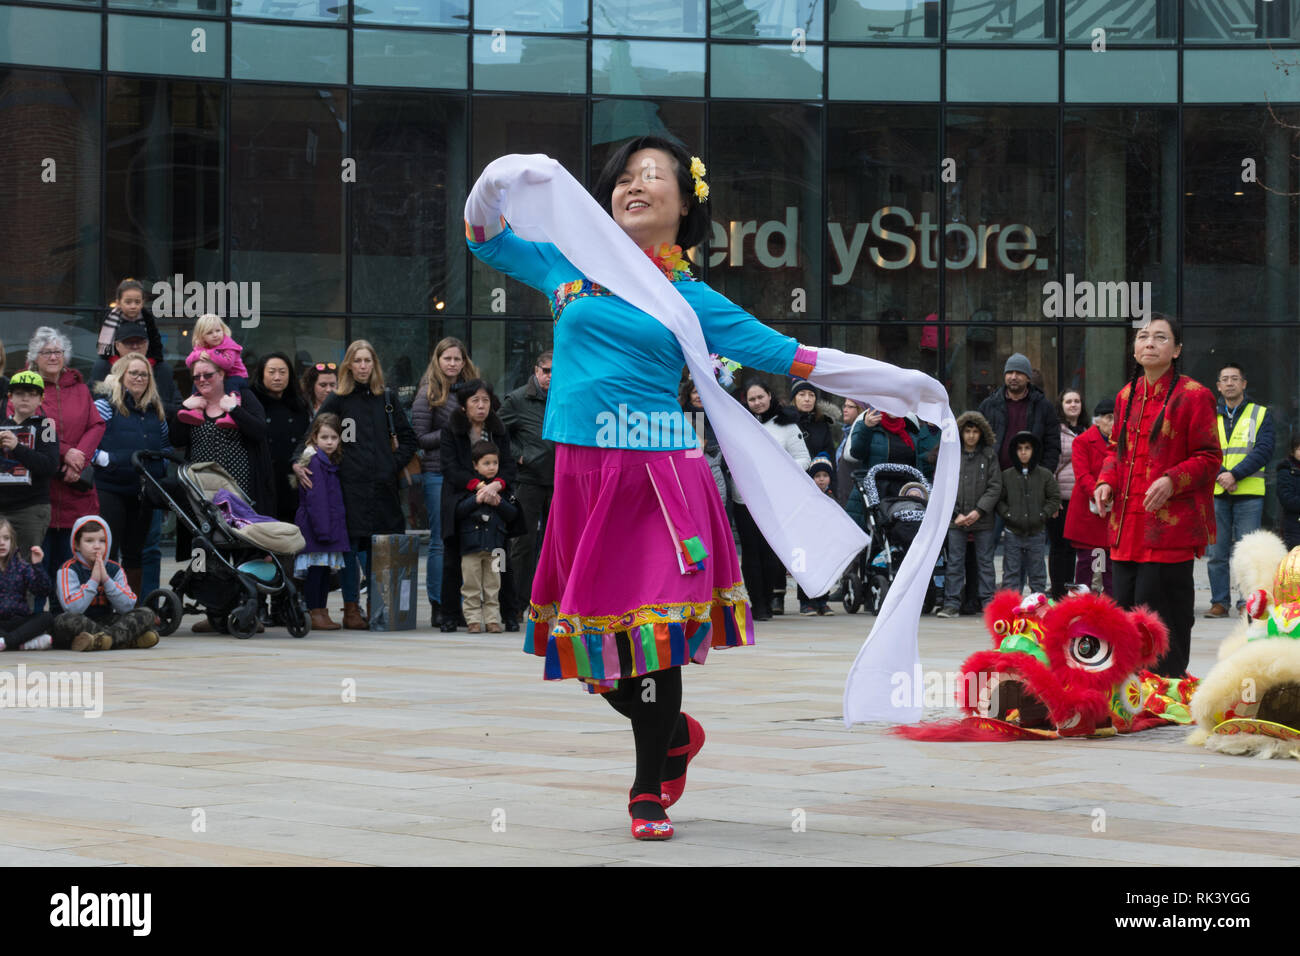 Woking, Surrey, UK. 9th February, 2019. Woking town centre celebrated the Chinese New Year of the Pig today with colourful parades and shows. A dance performance. Stock Photo